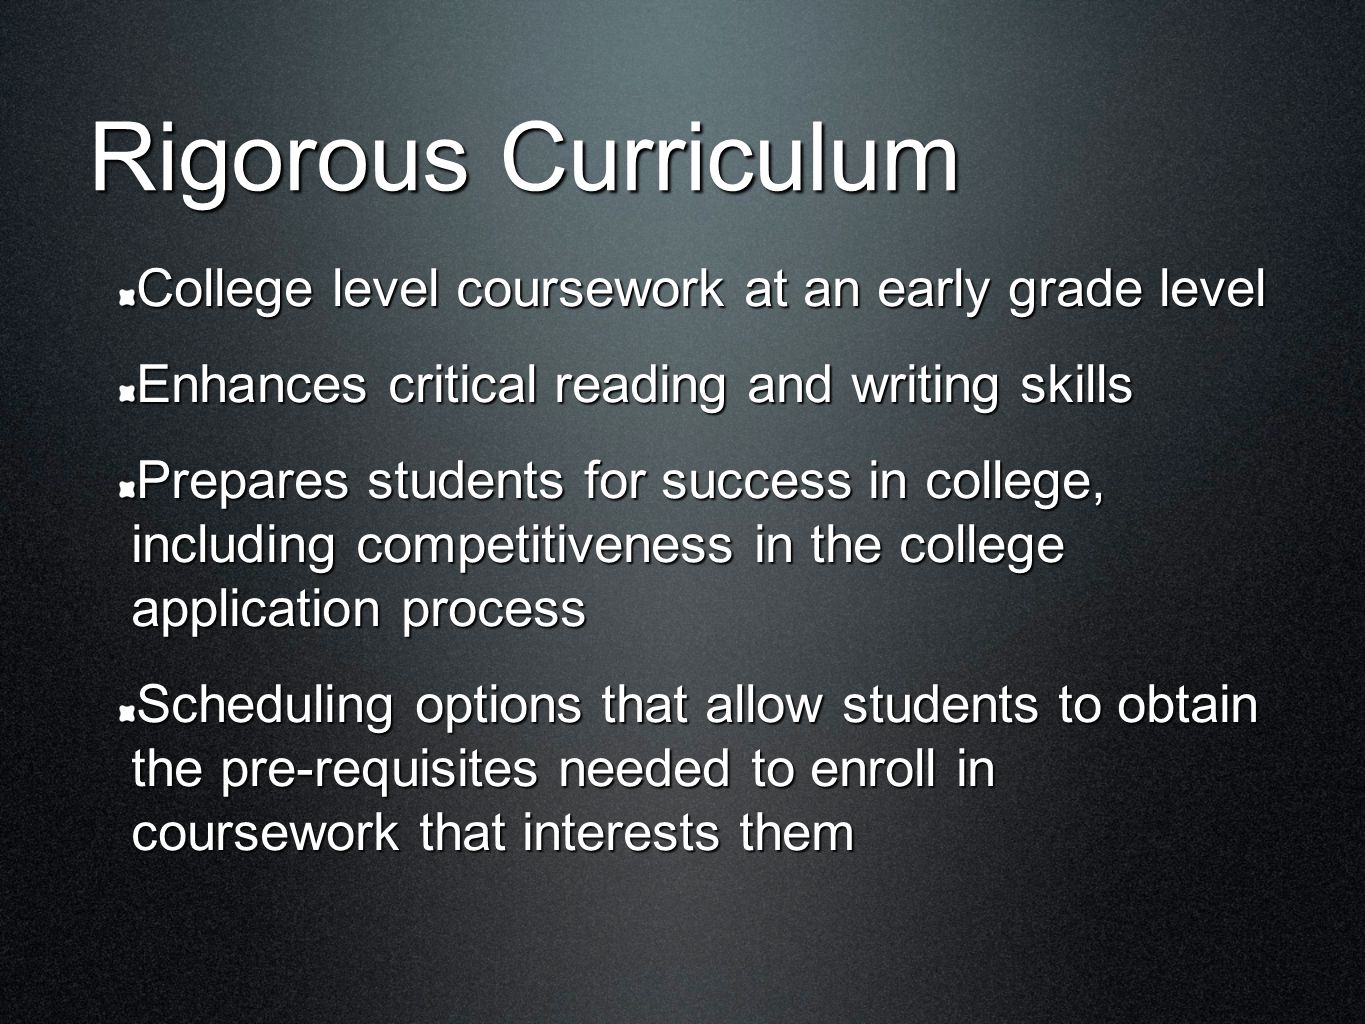 Rigorous Curriculum College level coursework at an early grade level Enhances critical reading and writing skills Prepares students for success in college, including competitiveness in the college application process Scheduling options that allow students to obtain the pre-requisites needed to enroll in coursework that interests them